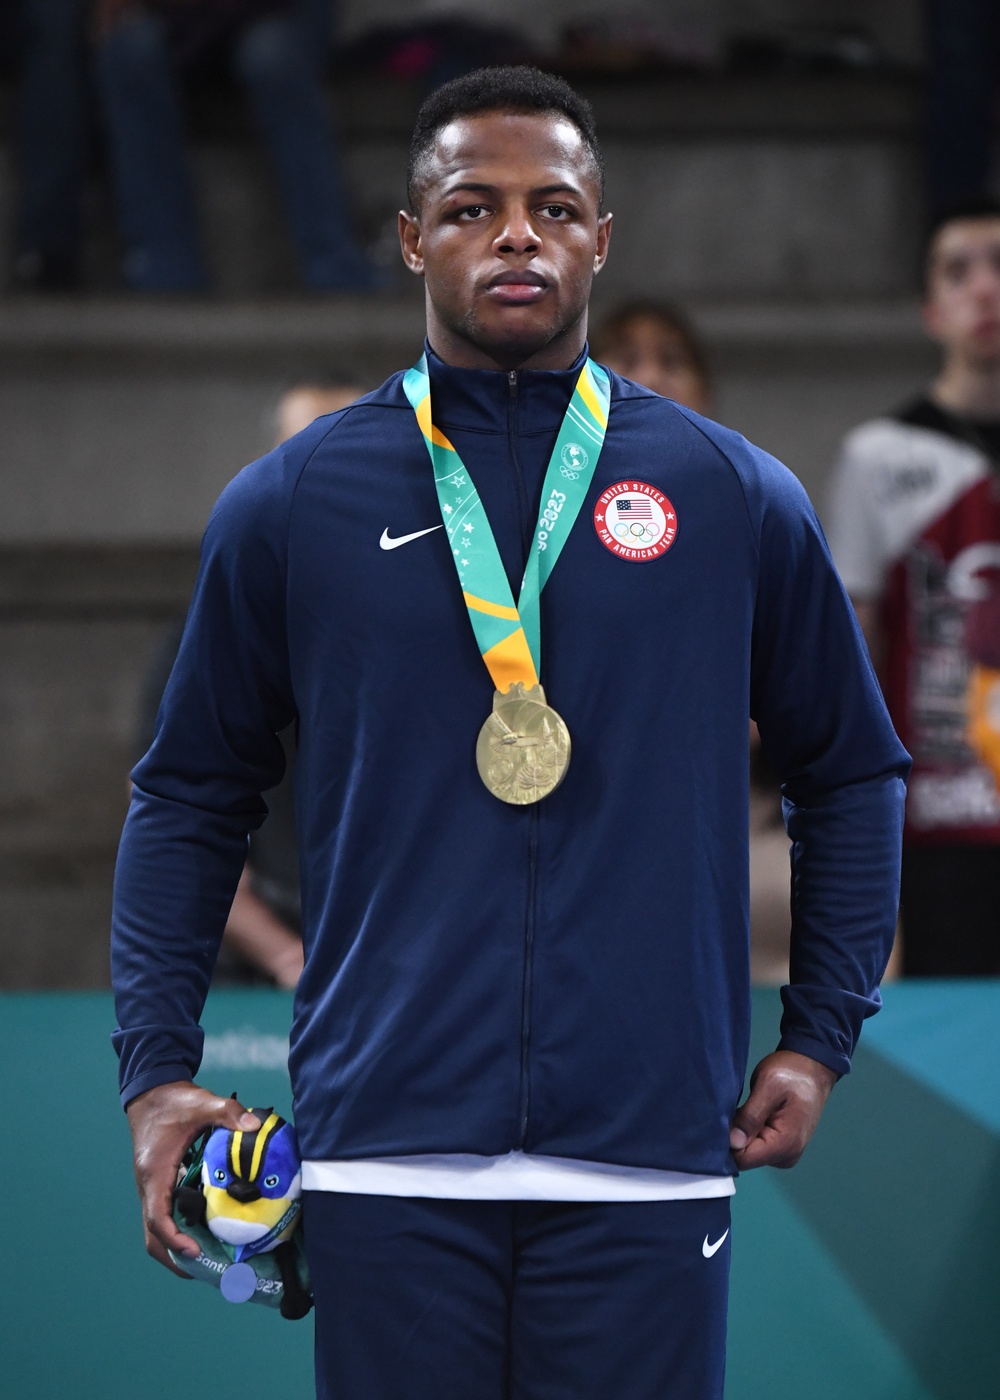 Spc. Kamal Bey wins the 77kg gold medal in Greco-Roman wrestling at the Pan American Games